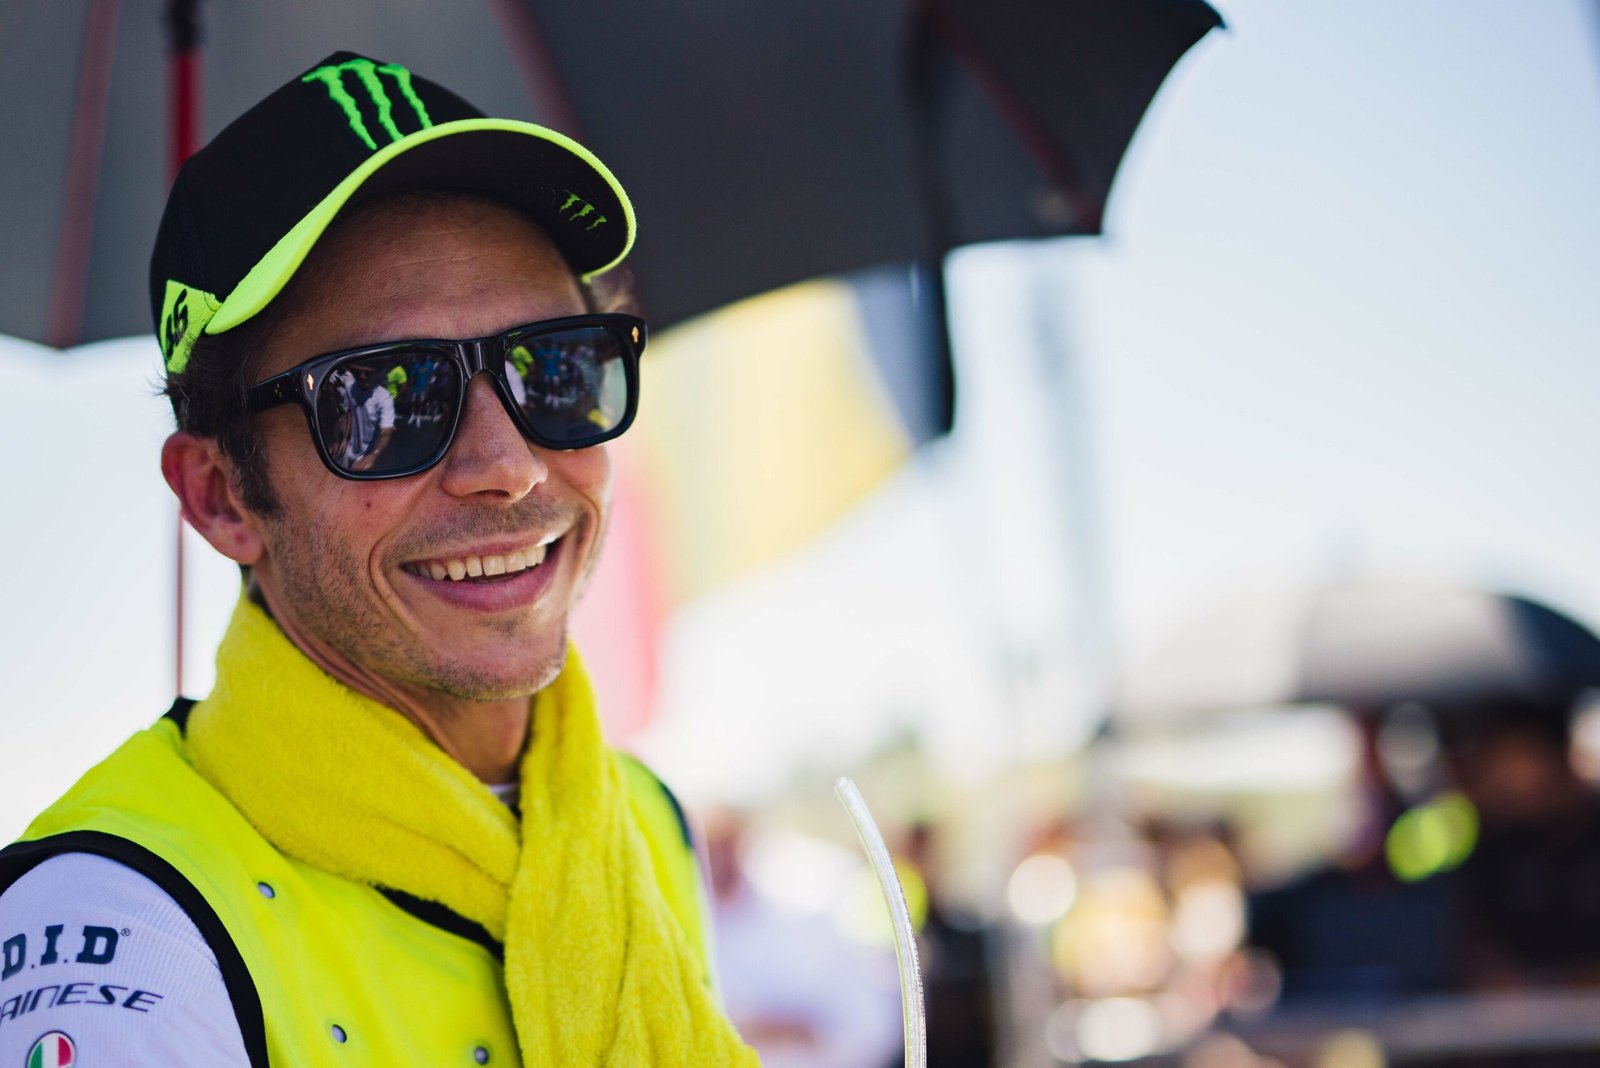 Valentino Rossi will be the newest member of the BMW M Motorsport works driver family.